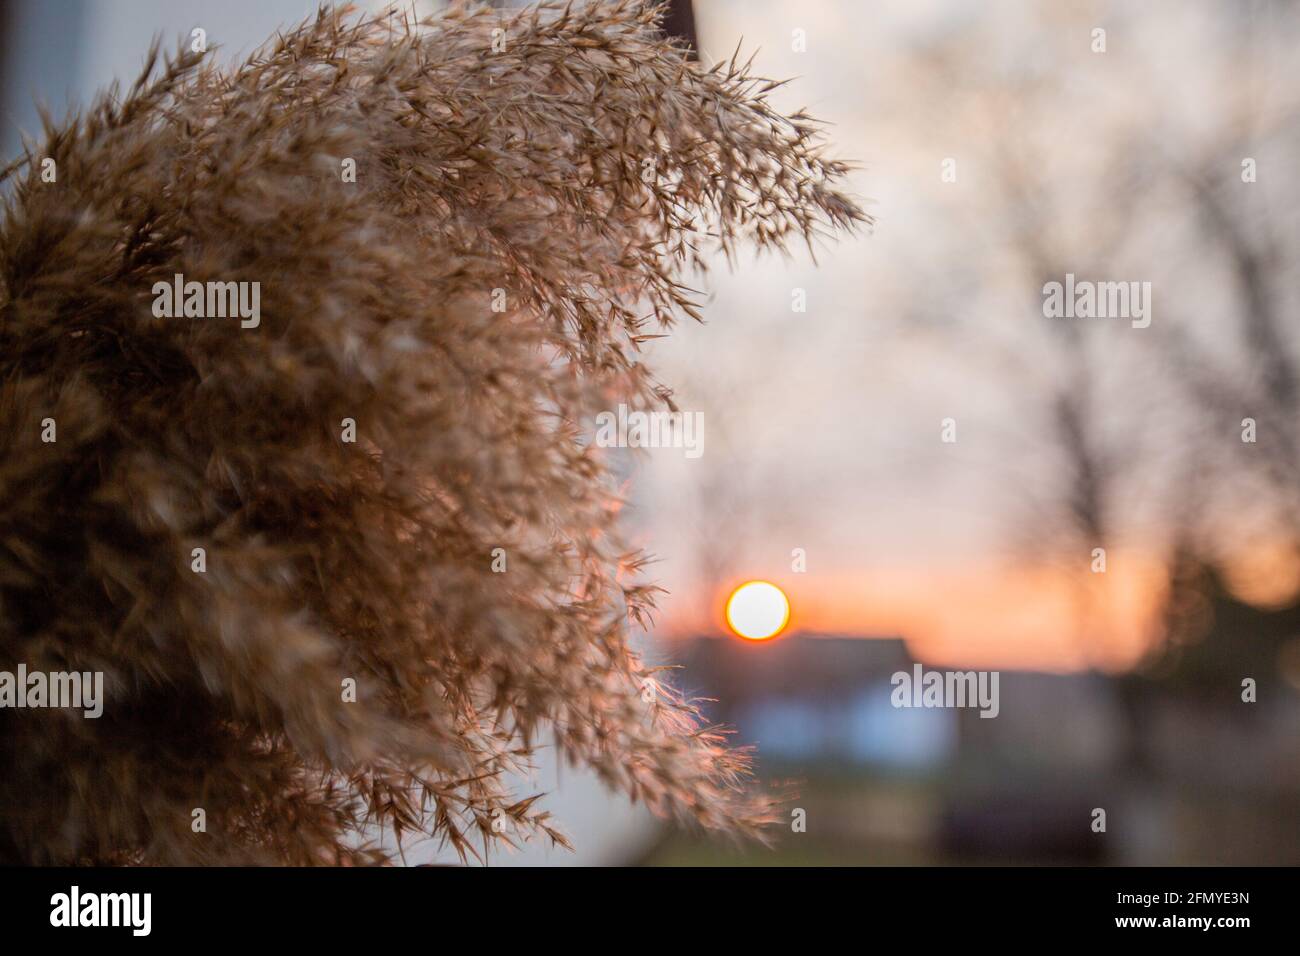 dry branch of reeds against the background of a blurred house and the setting sun. shallow depth of field Stock Photo